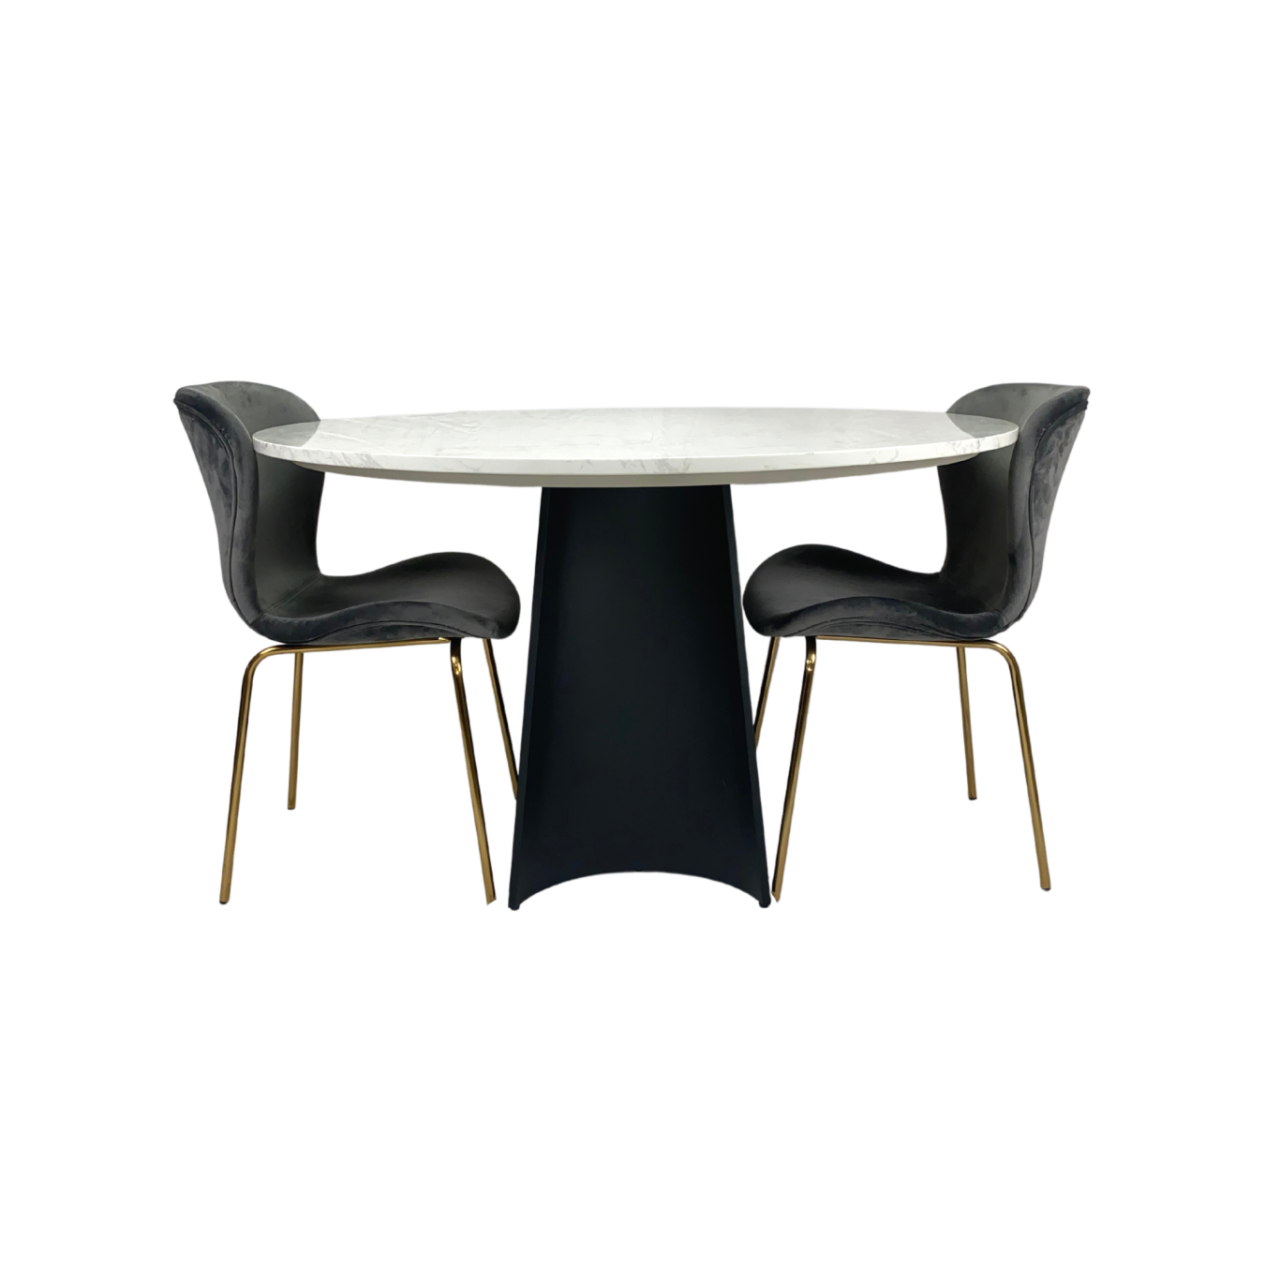 Rosemary Round Dining Table-Black & White Marble